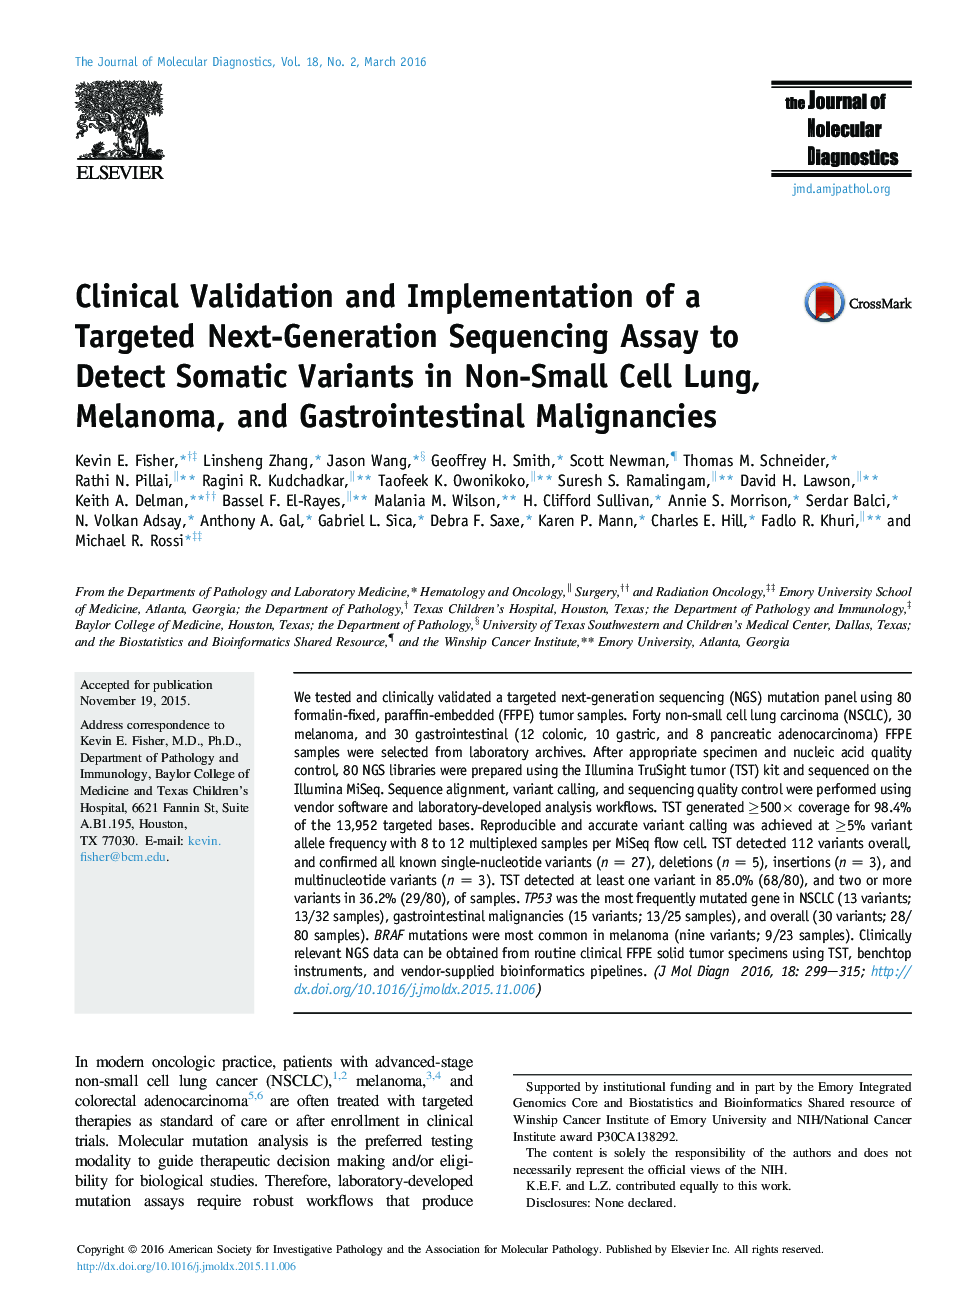 Regular articleClinical Validation and Implementation of a Targeted Next-Generation Sequencing Assay to Detect Somatic Variants in Non-Small Cell Lung, Melanoma, and Gastrointestinal Malignancies